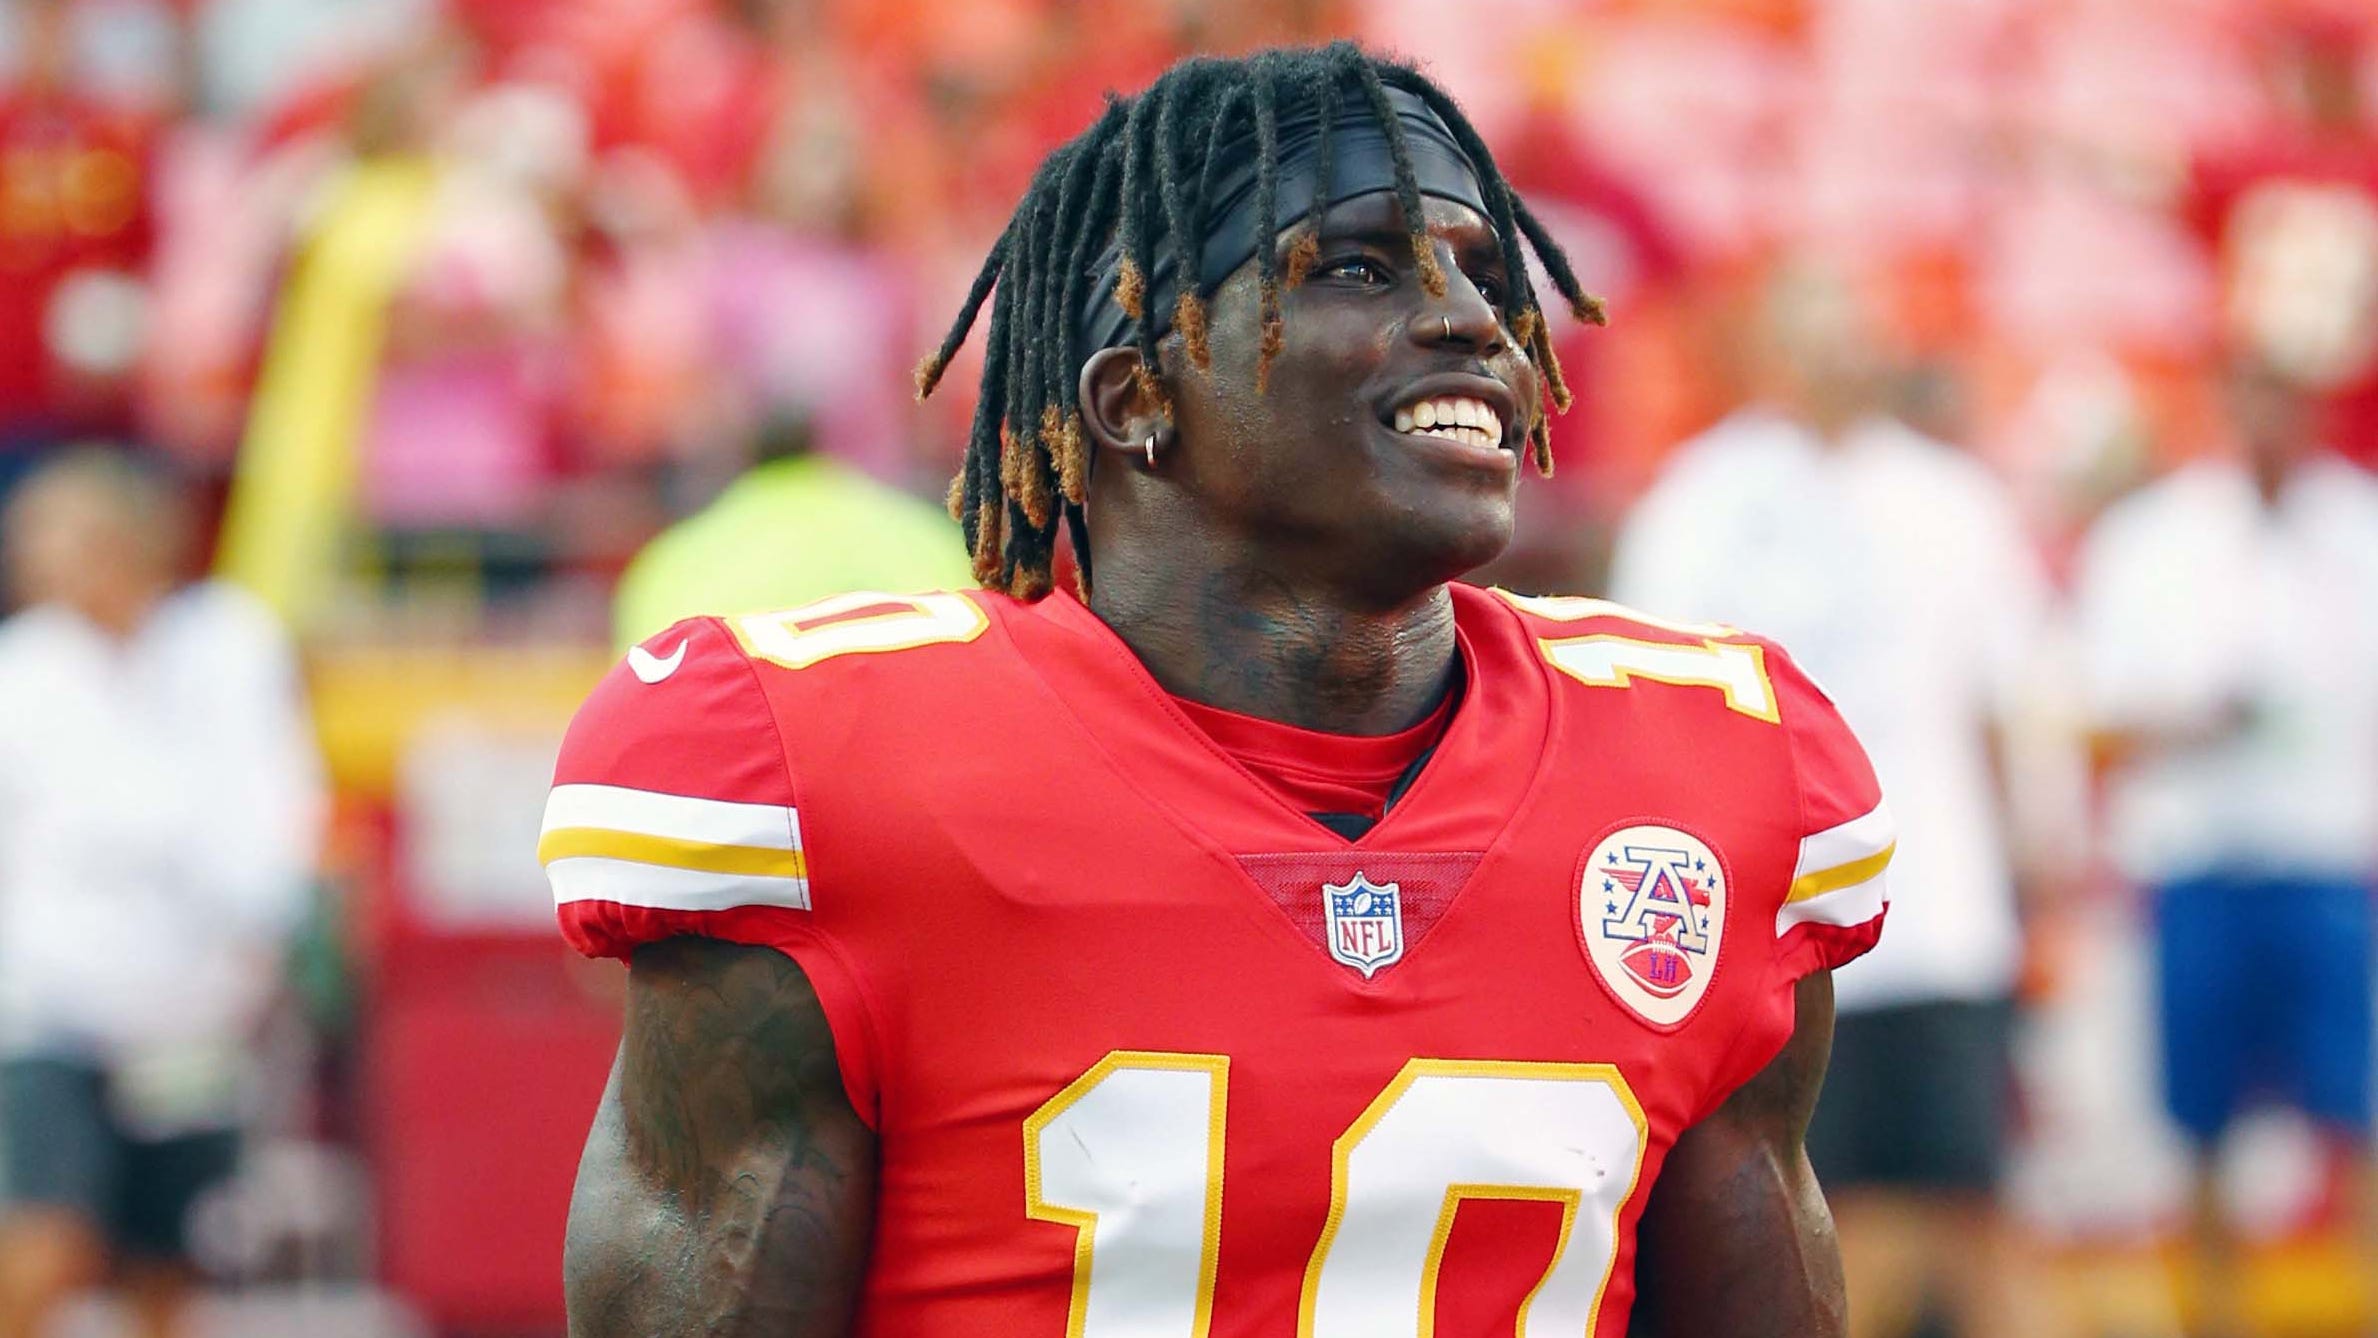 Chiefs' Tyreek Hill avoids NFL suspension over child abuse allegations